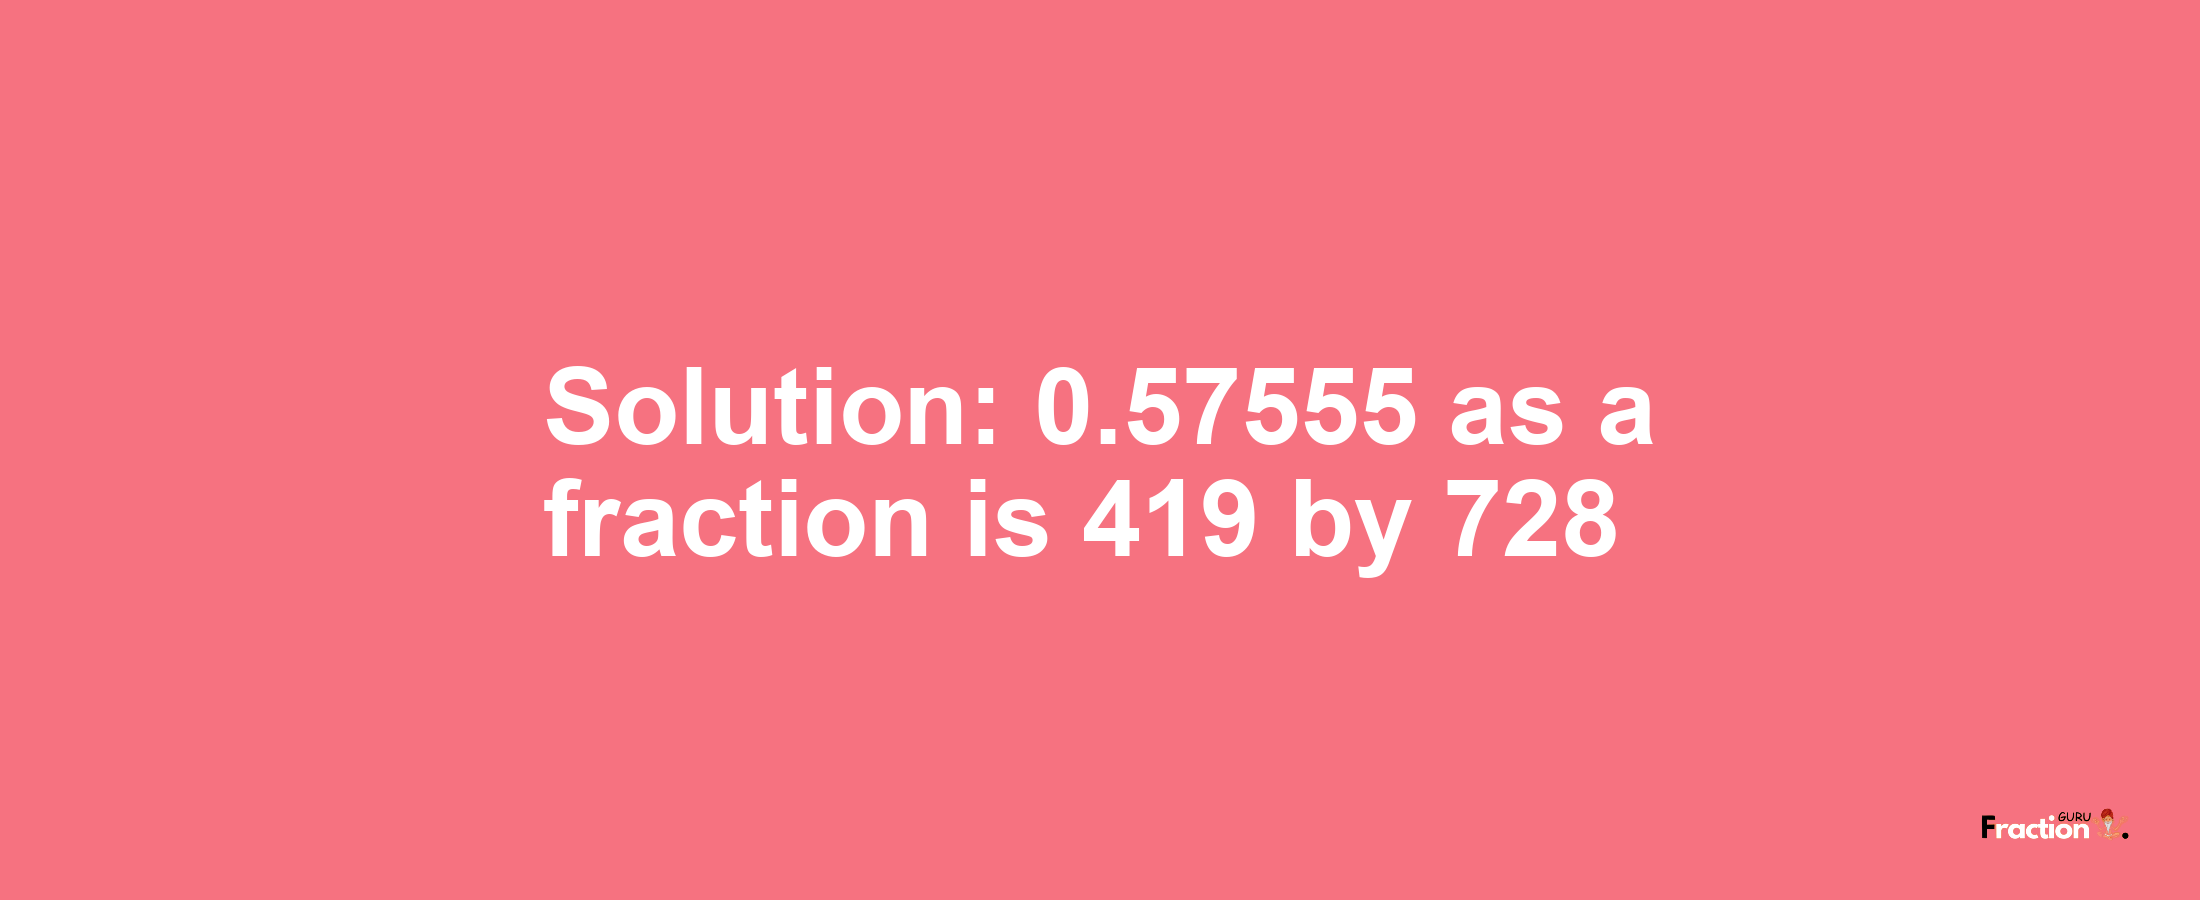 Solution:0.57555 as a fraction is 419/728